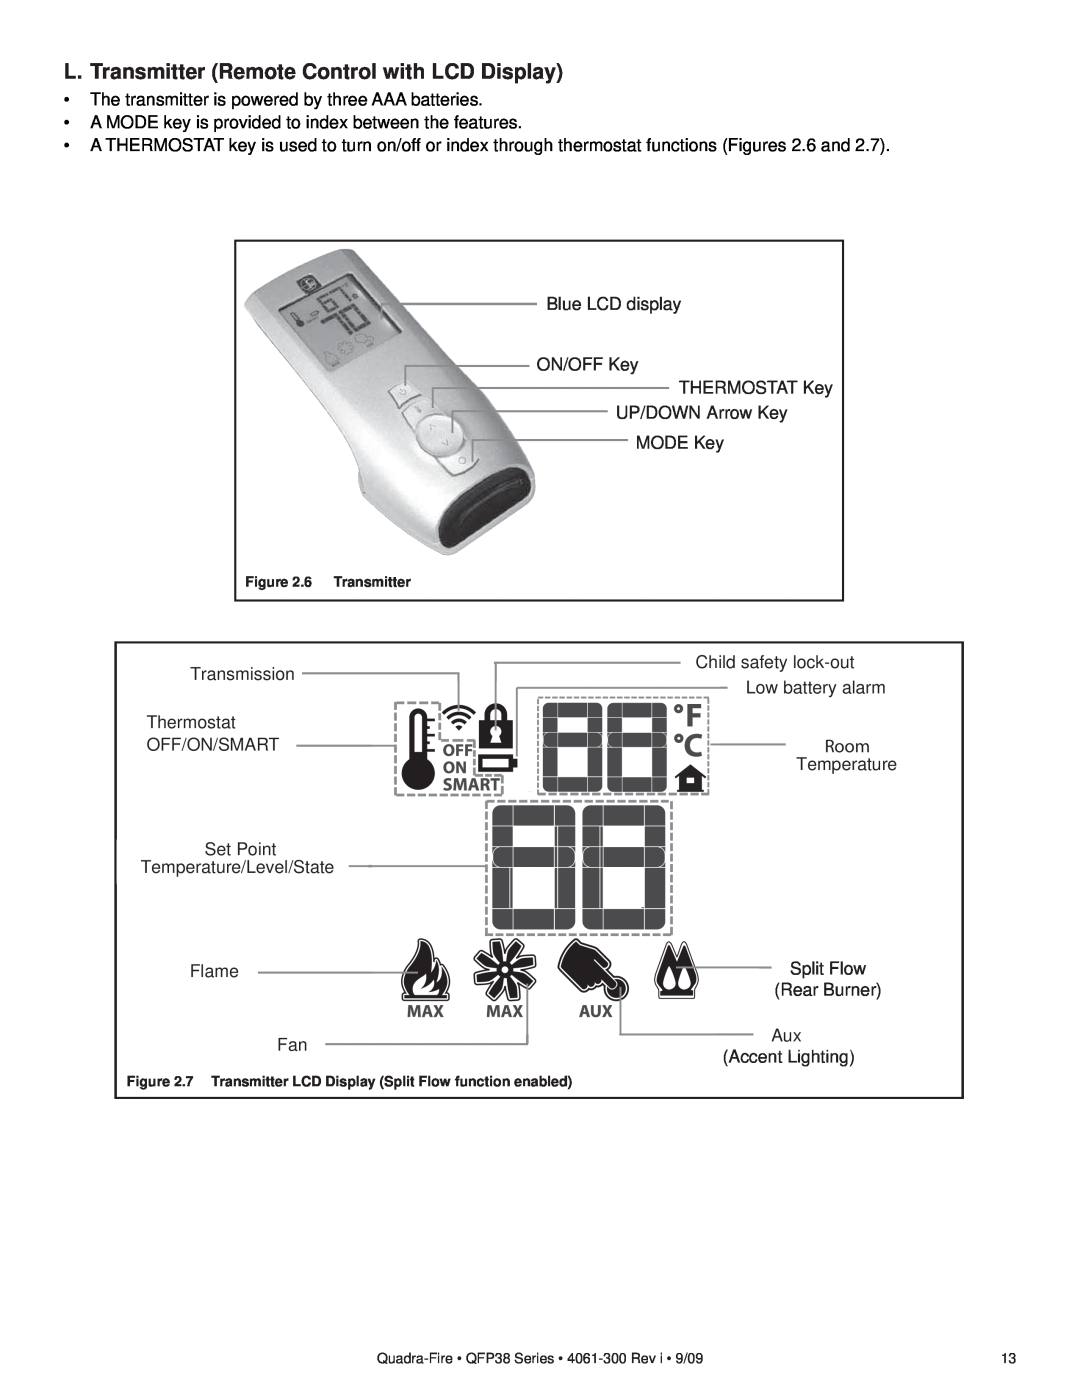 Quadra-Fire QFP38-LP, QFP38-NG owner manual L. Transmitter Remote Control with LCD Display 